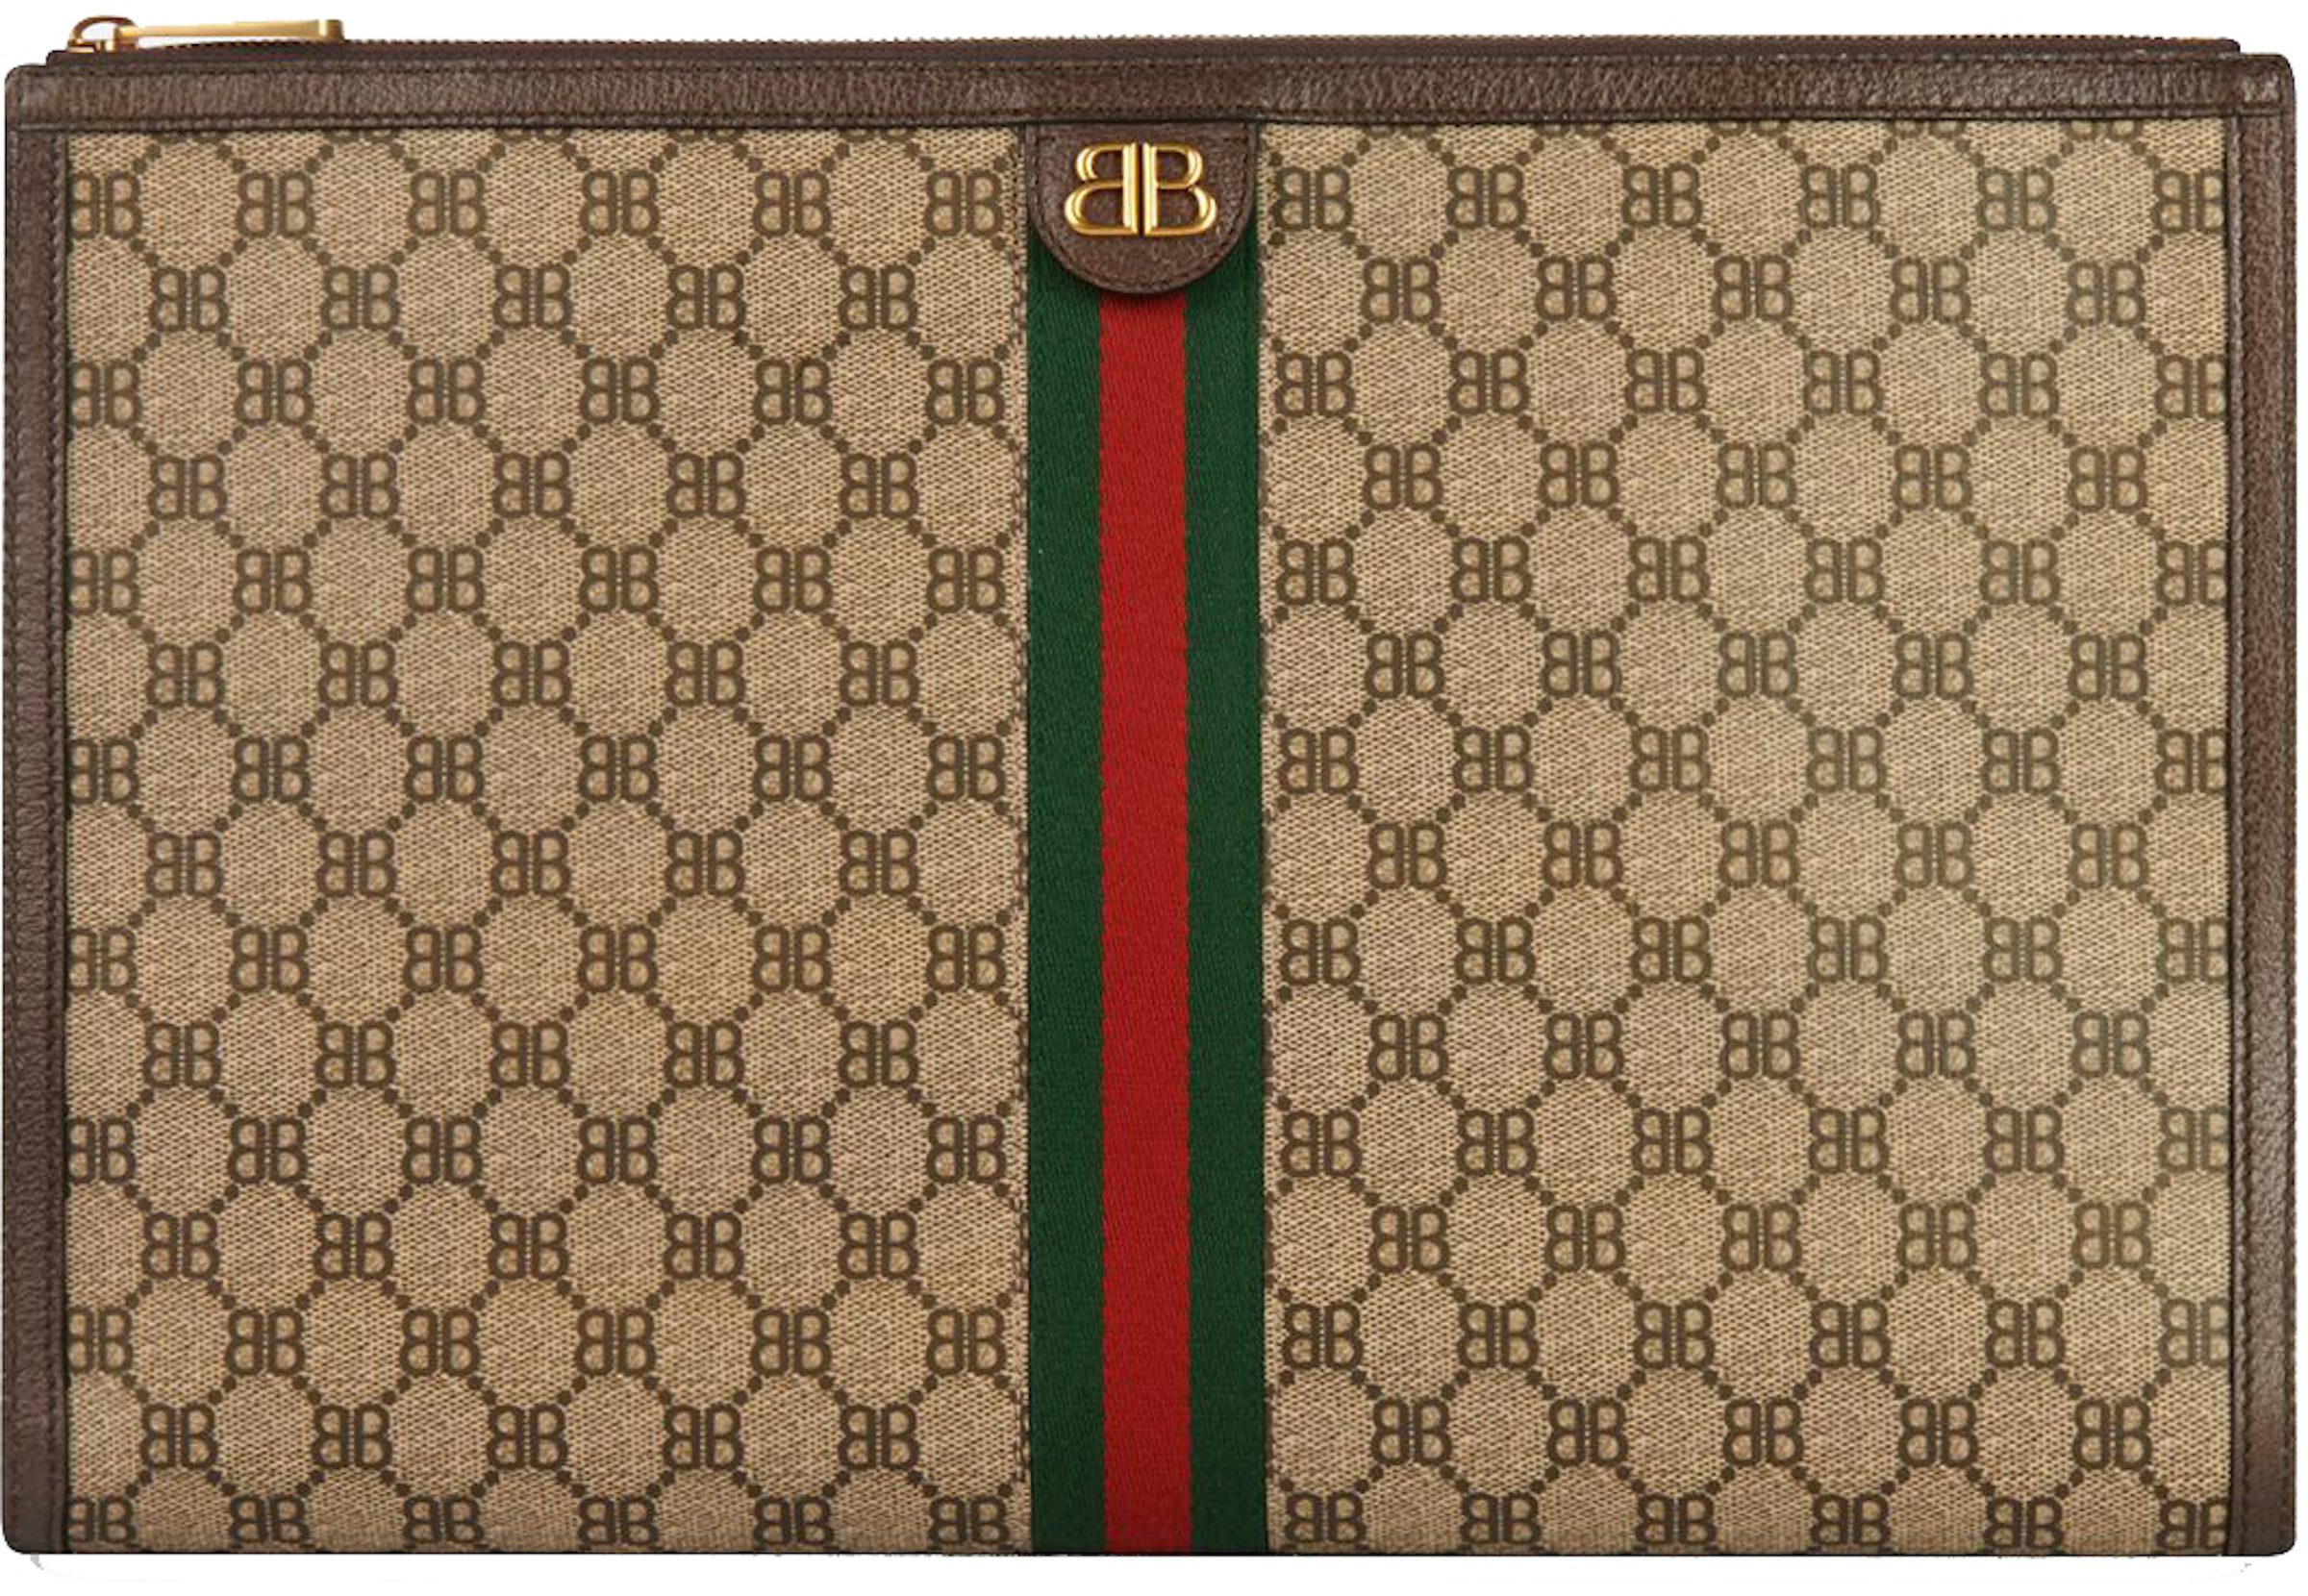 Gucci Laptop Case GG Brown in Canvas with Gold-tone - US